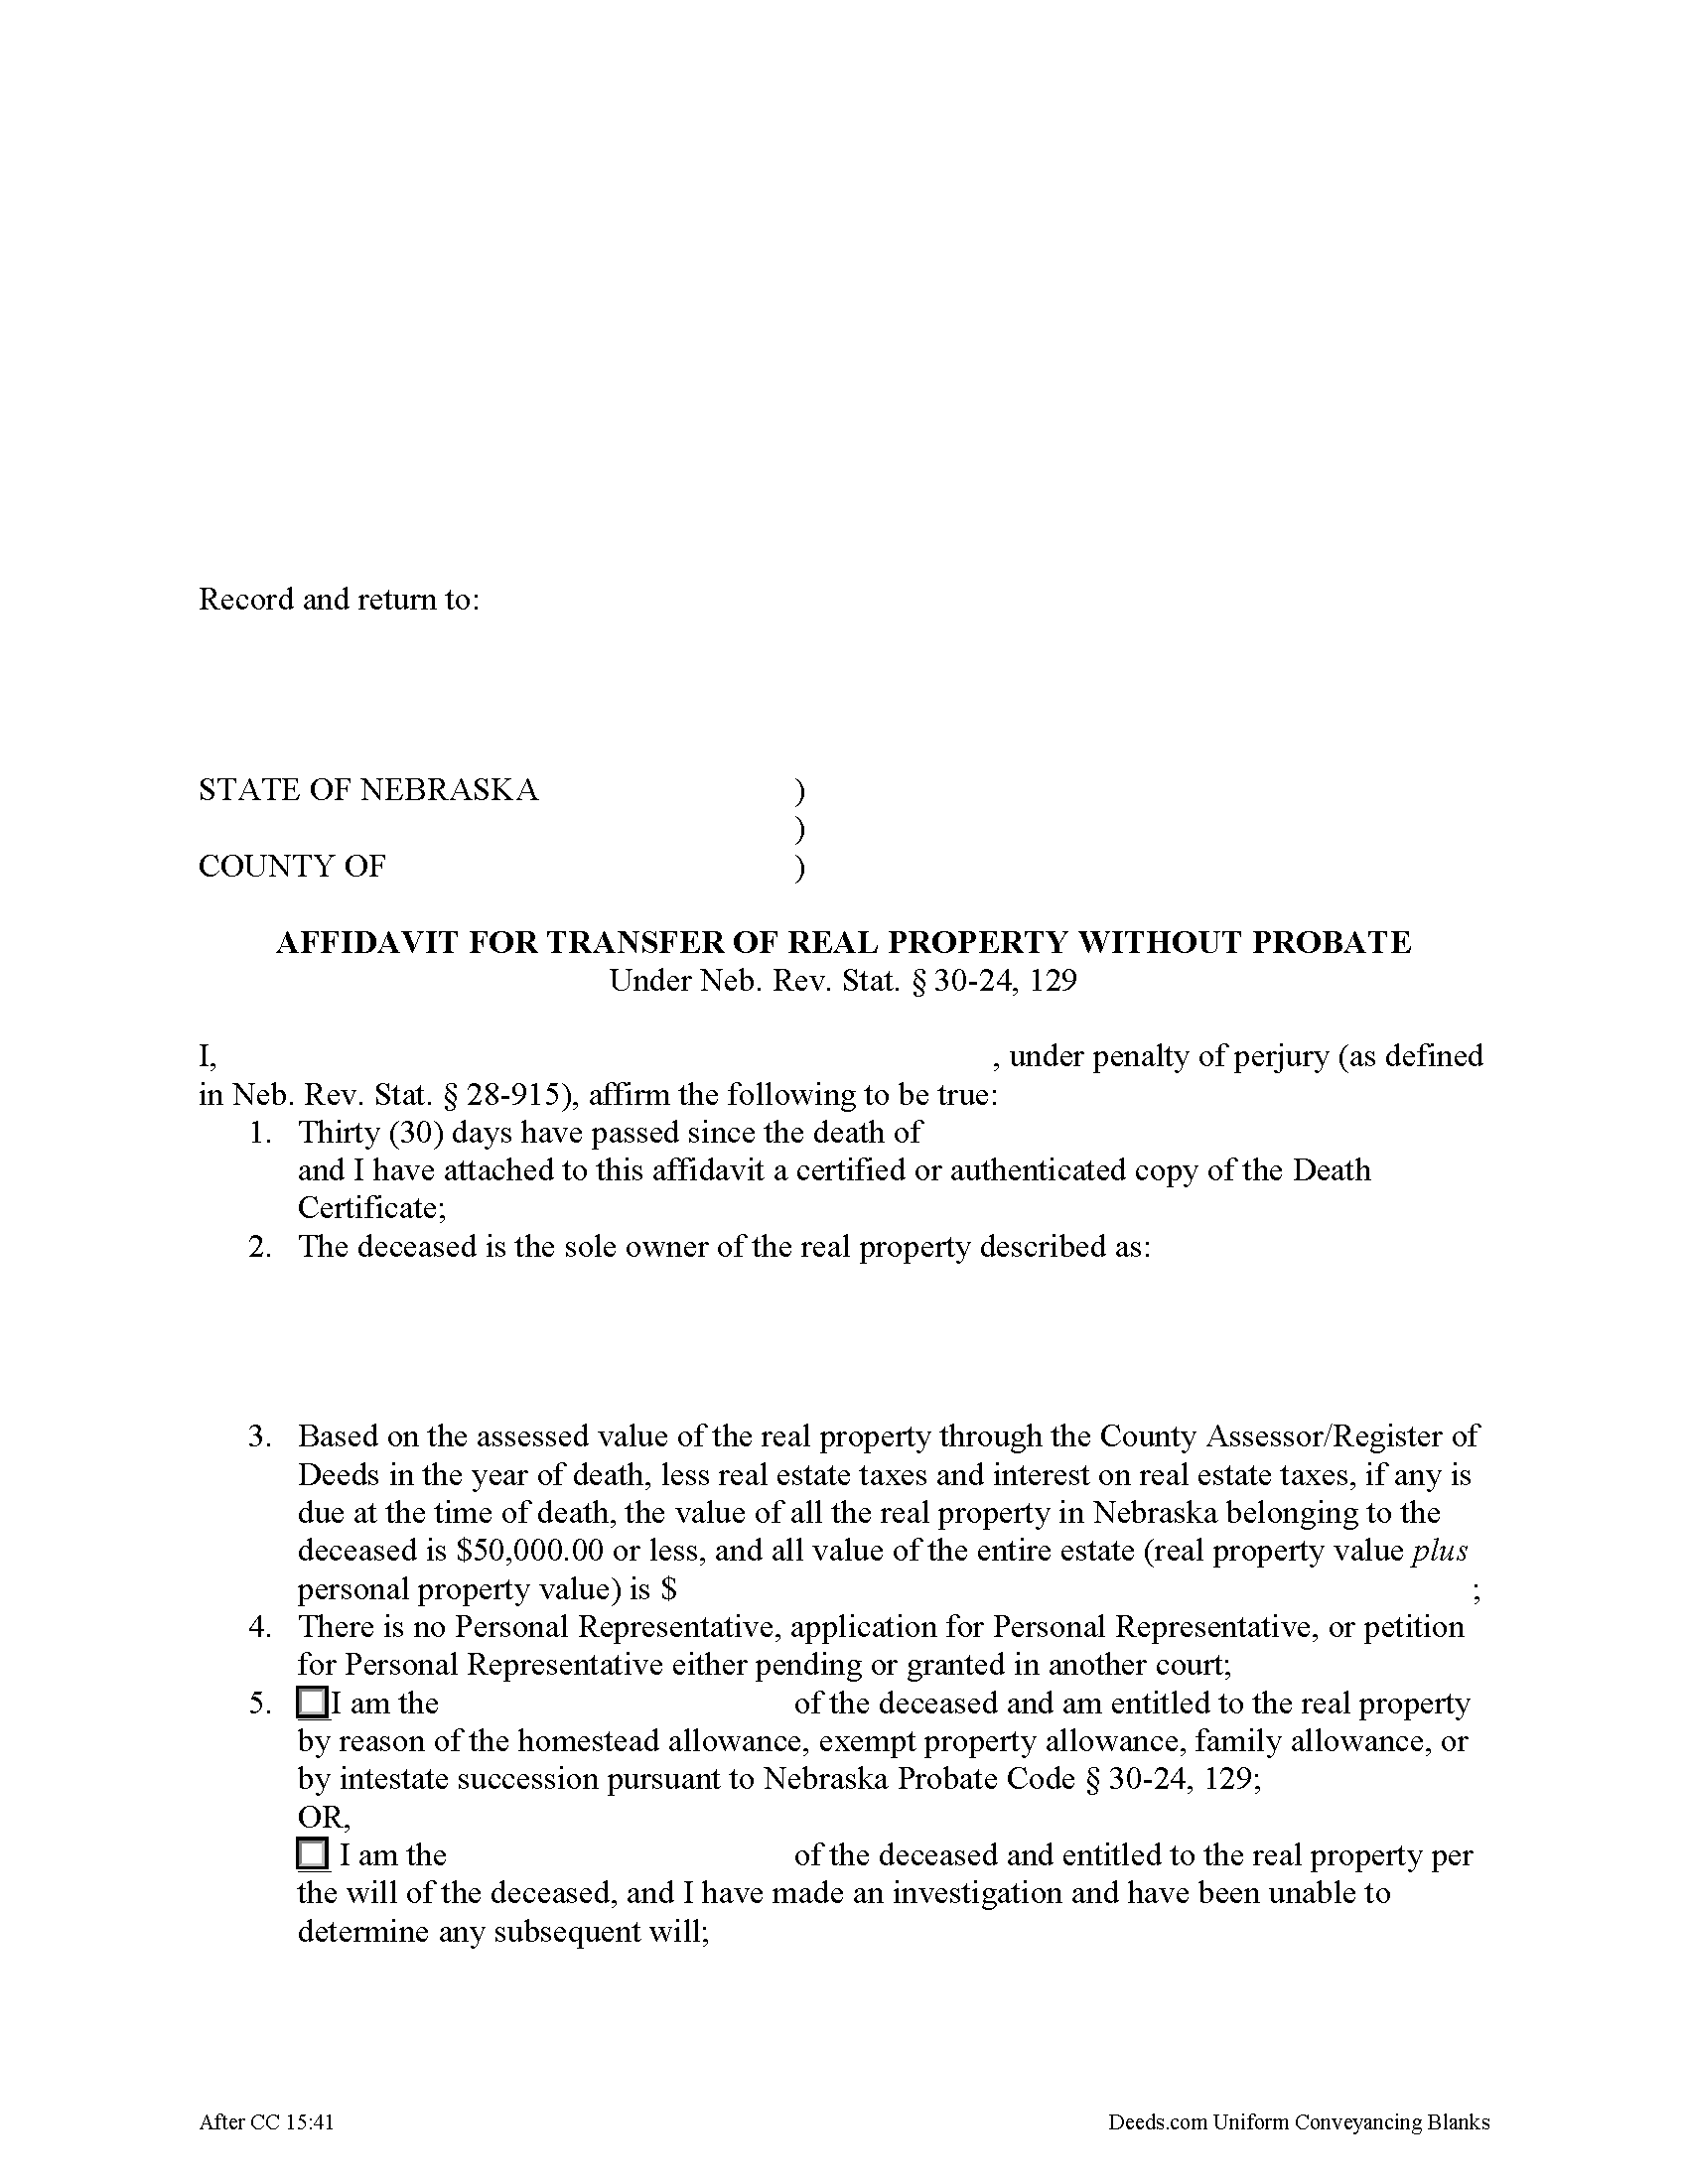 Affidavit for Transfer of Real Property without Probate Form